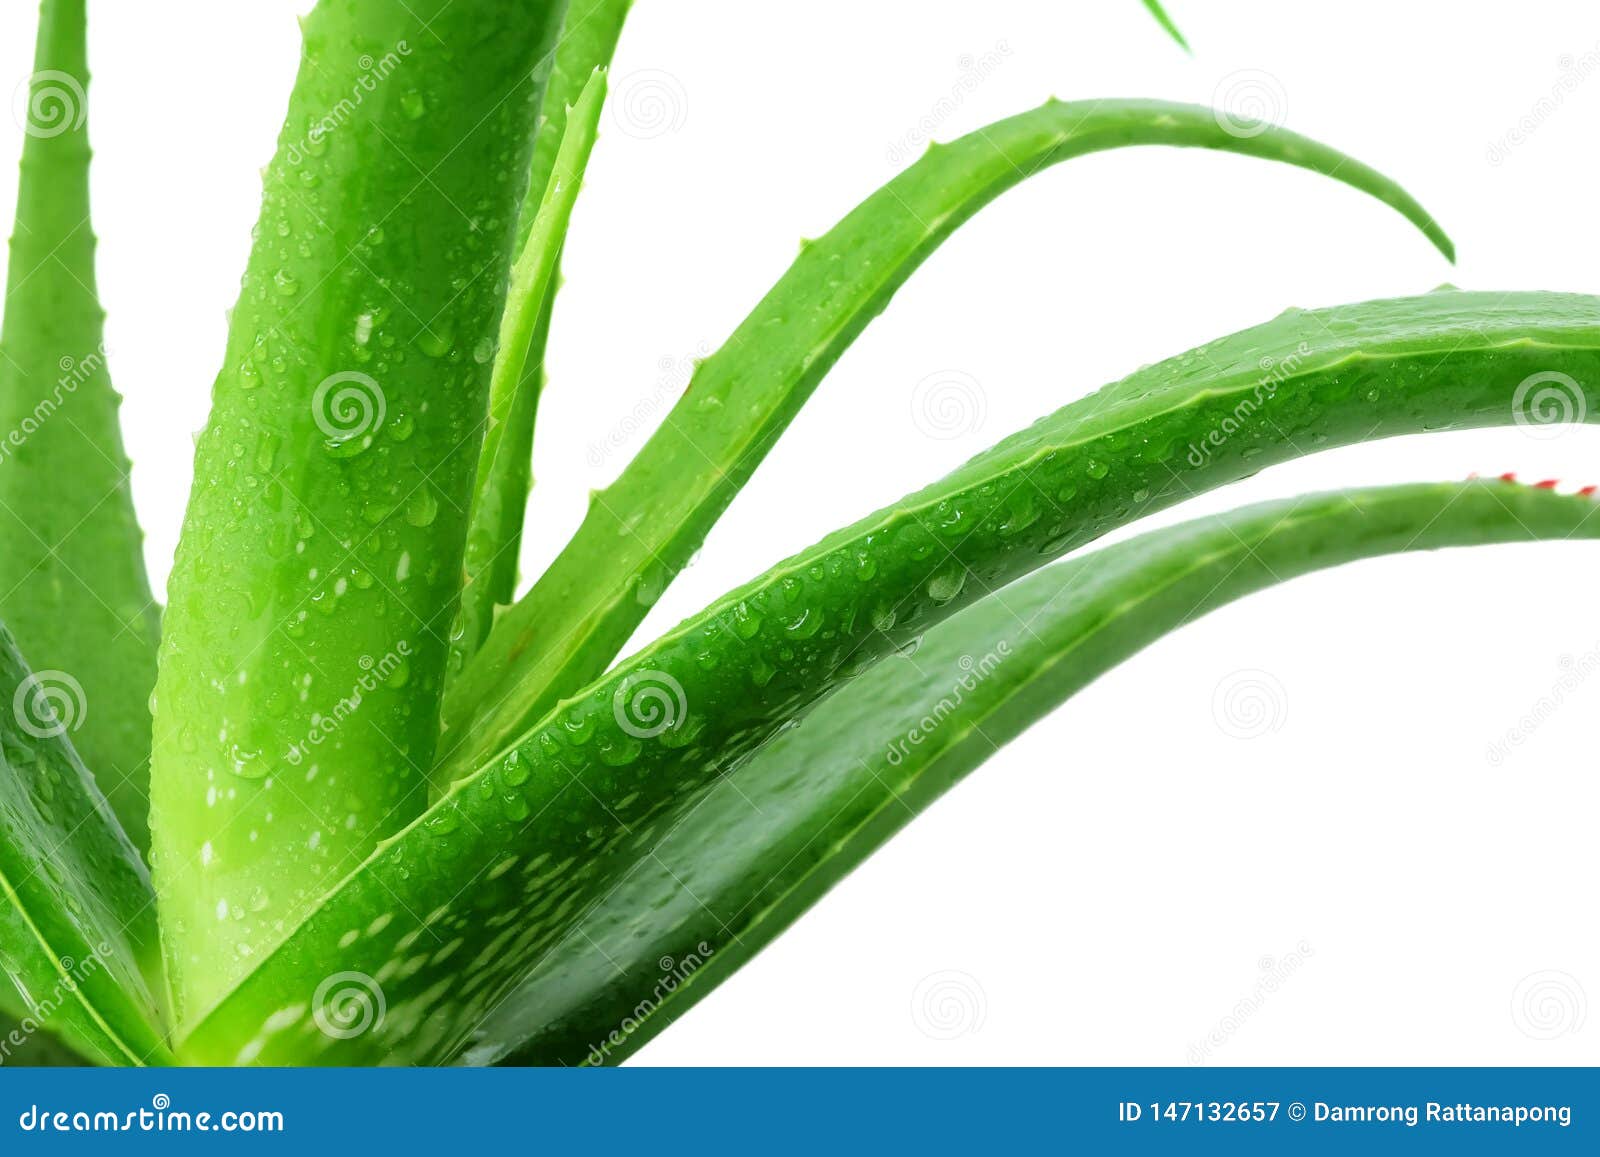 Closer To The Details Of Fresh Aloe Vera Plants With Water Drops